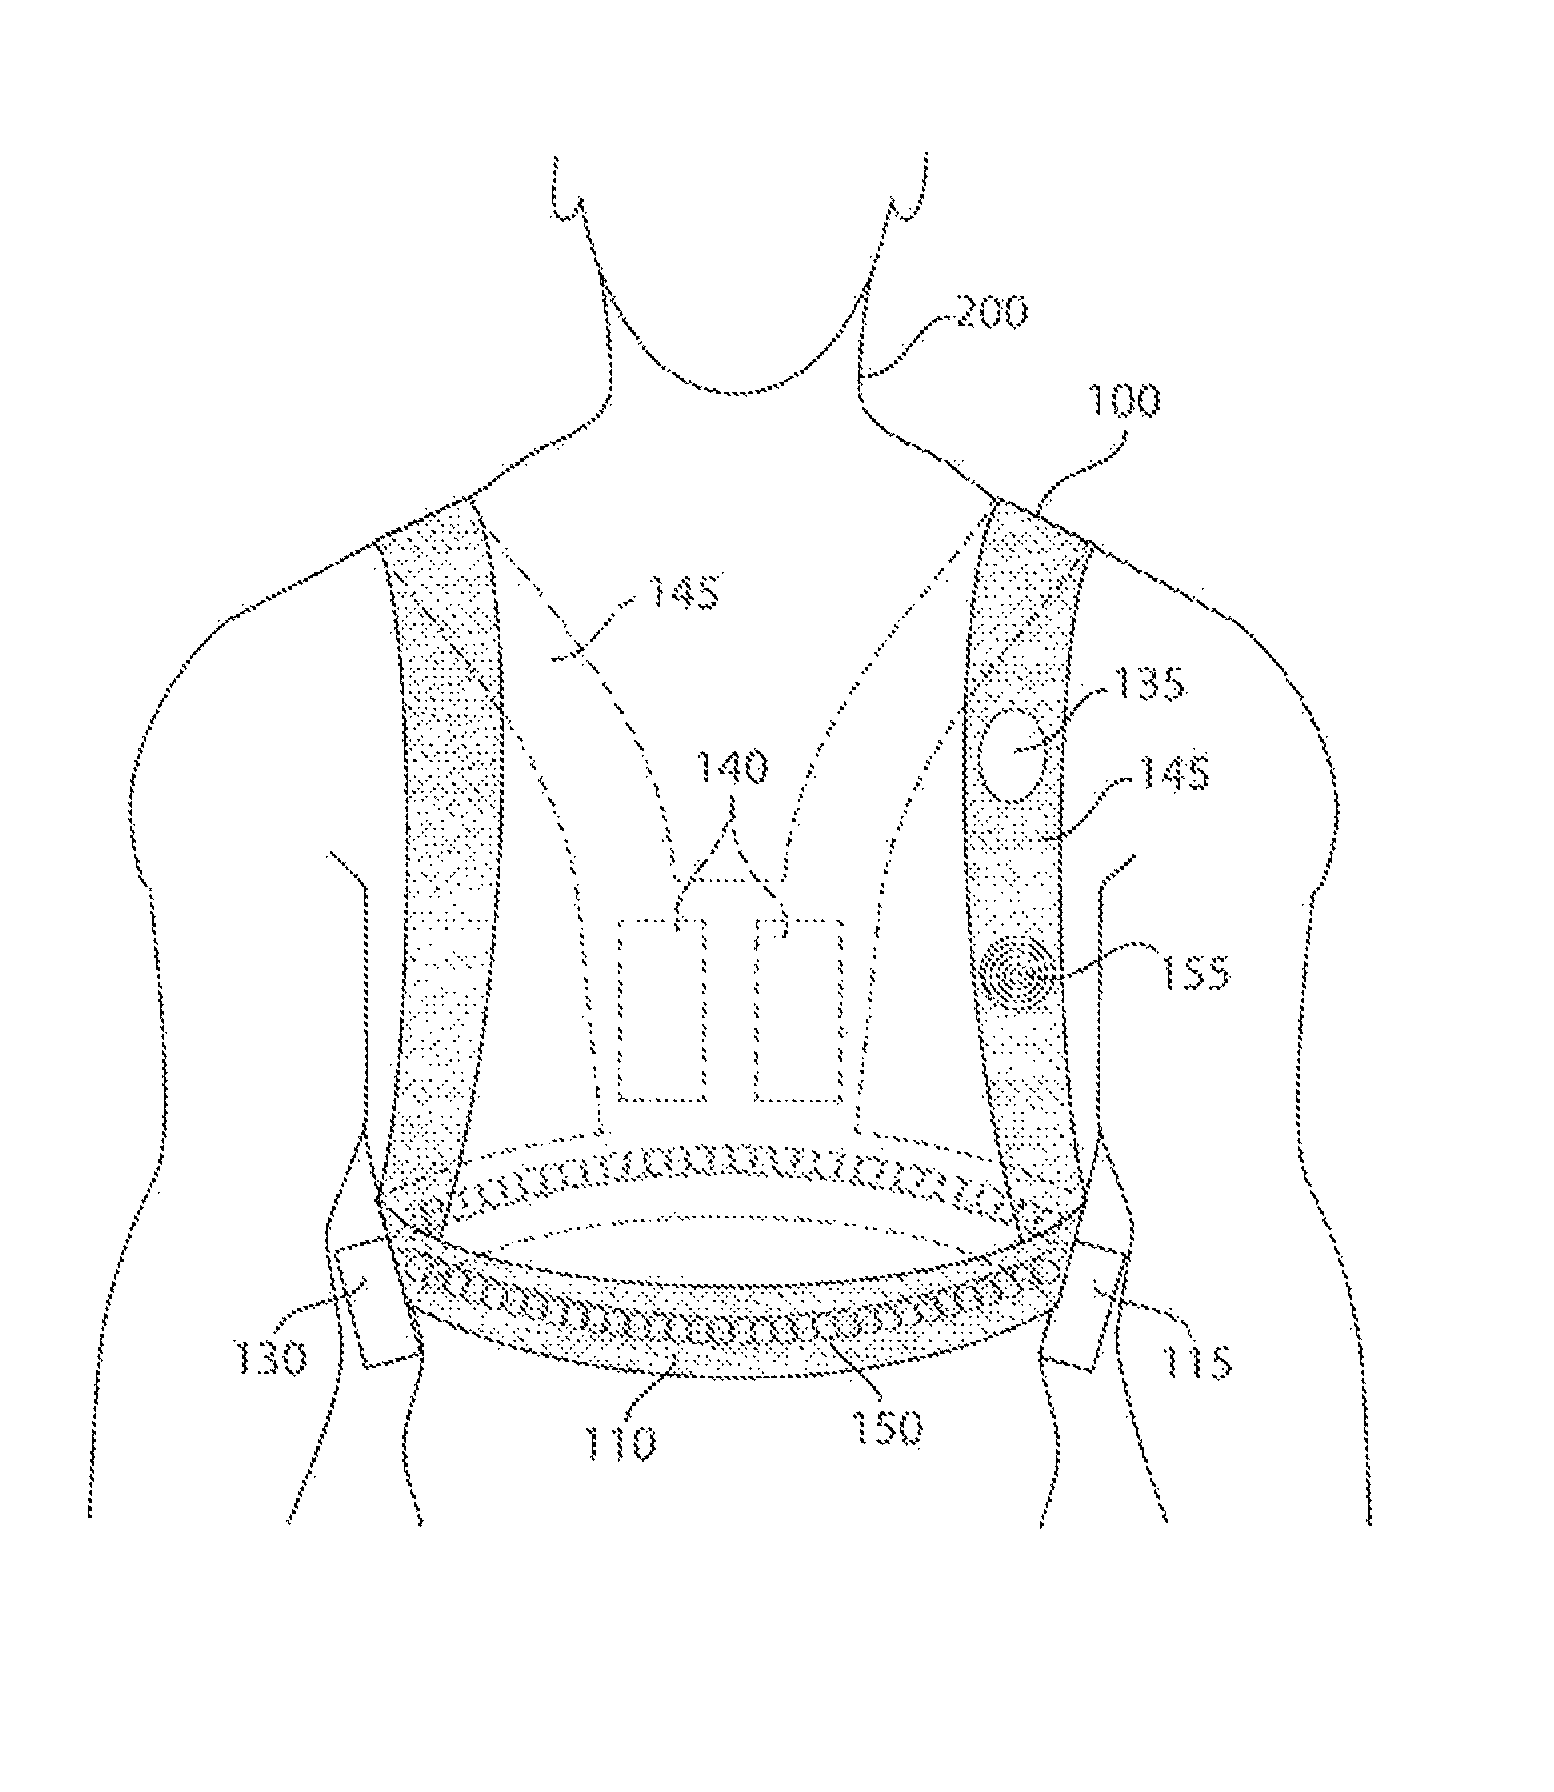 Wearable monitoring and treatment device